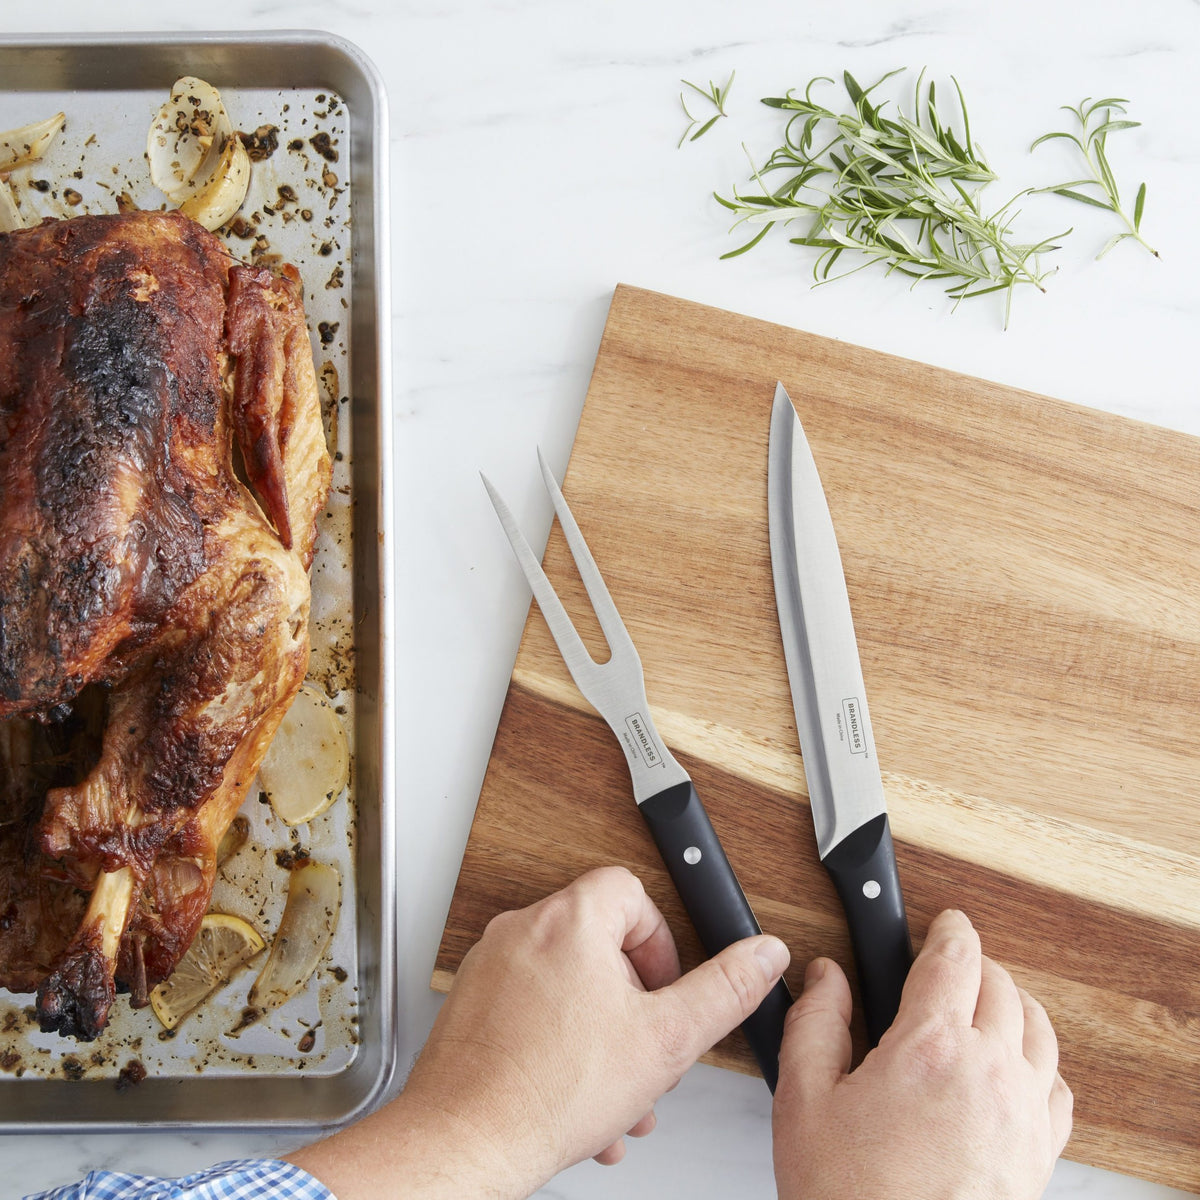 Lifestyle photo, man&#39;s hands reaching for a carving knive and carving fork sitting on a cuttong board nex to a roasted chicken on a pan just out of the oven.